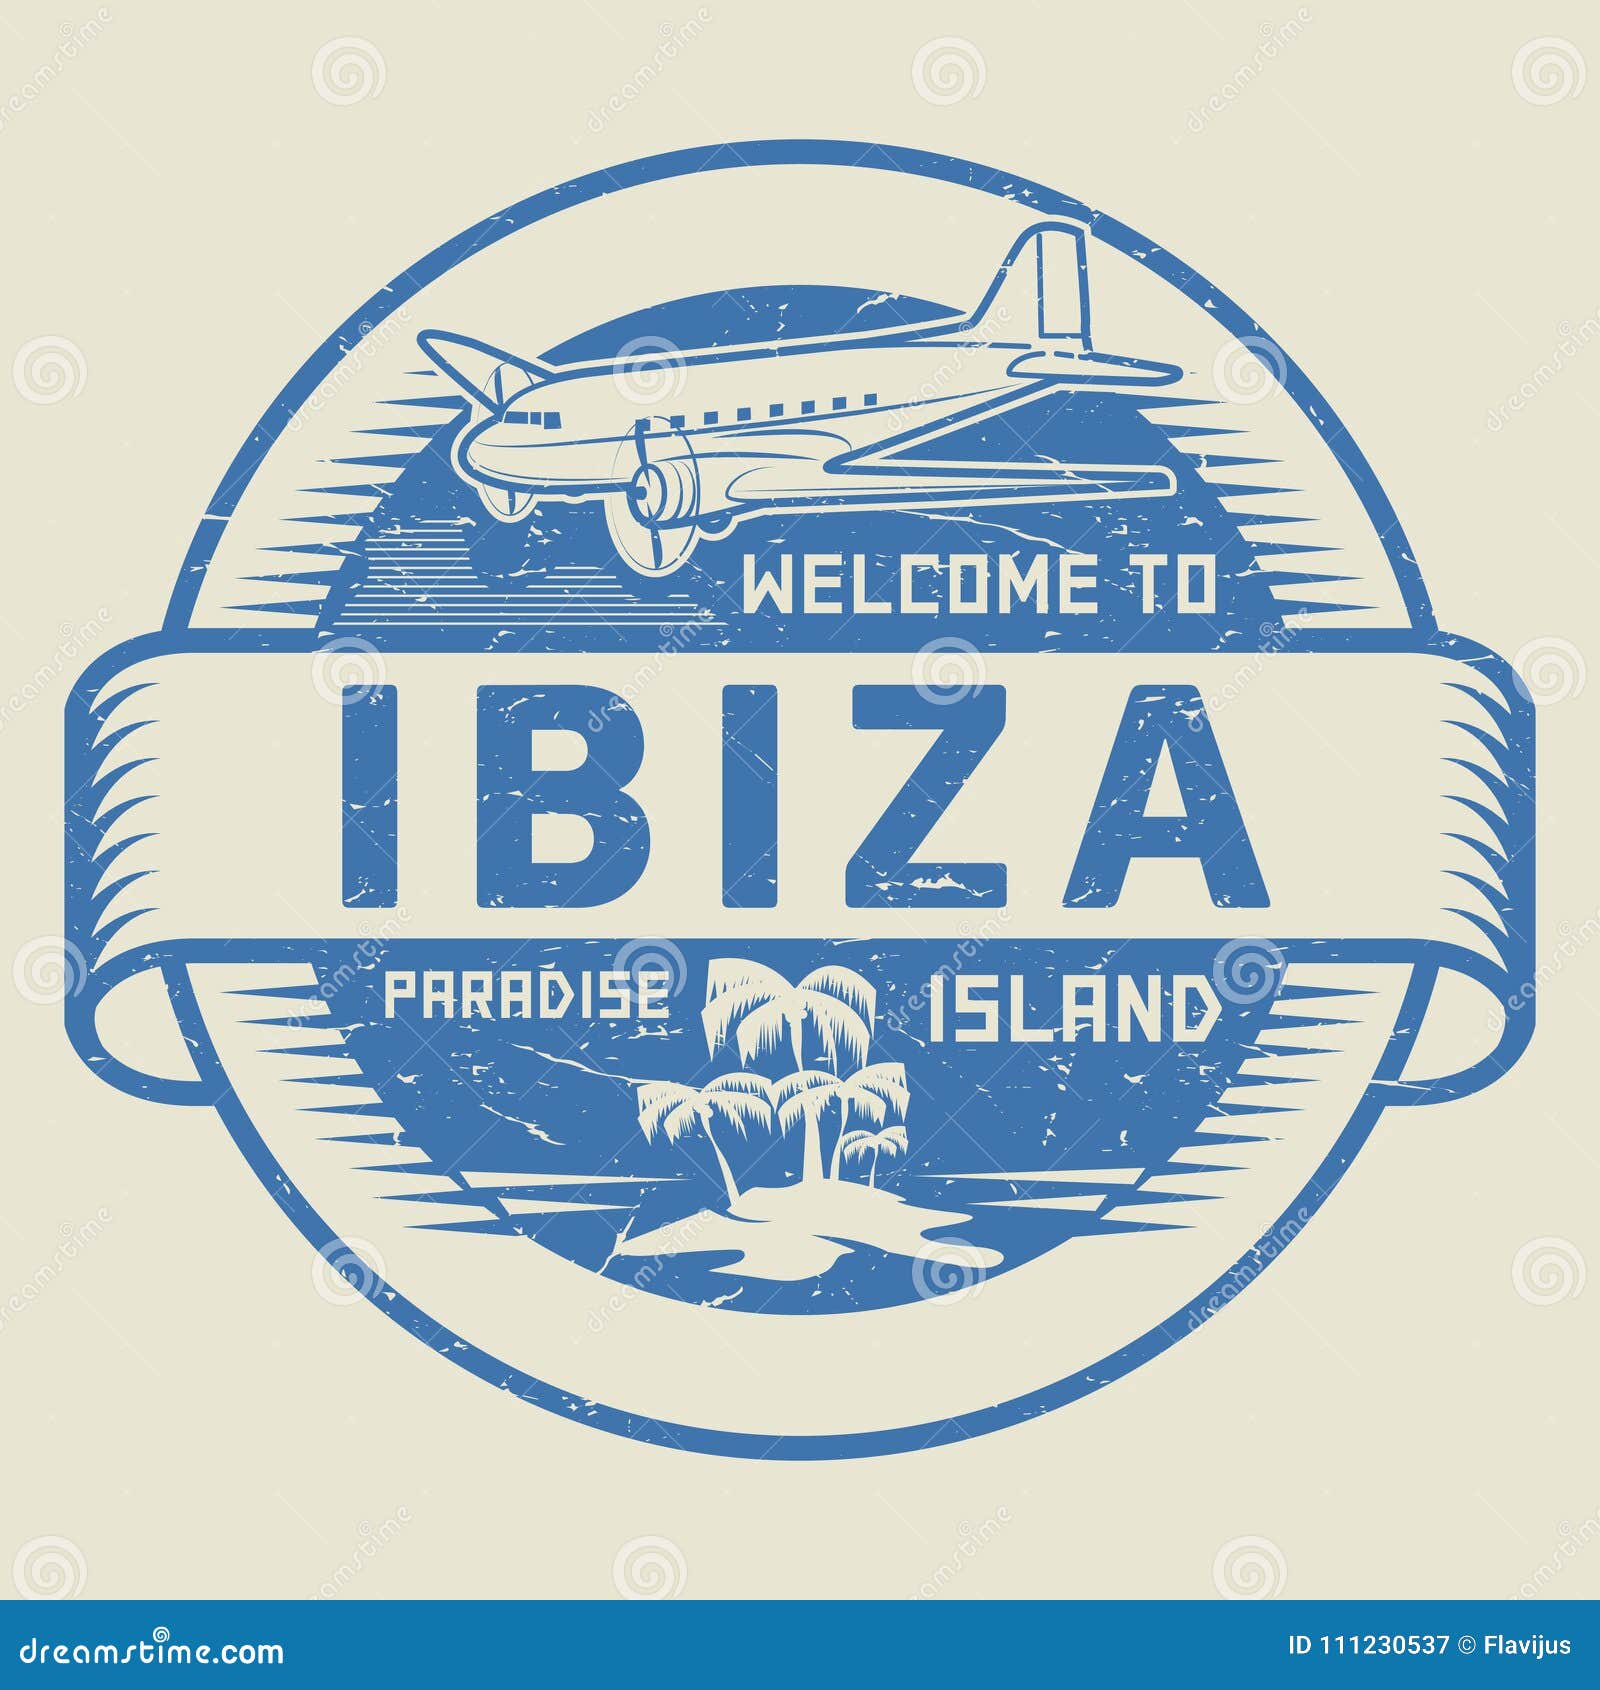 stamp with the text welcome to ibiza, paradise island